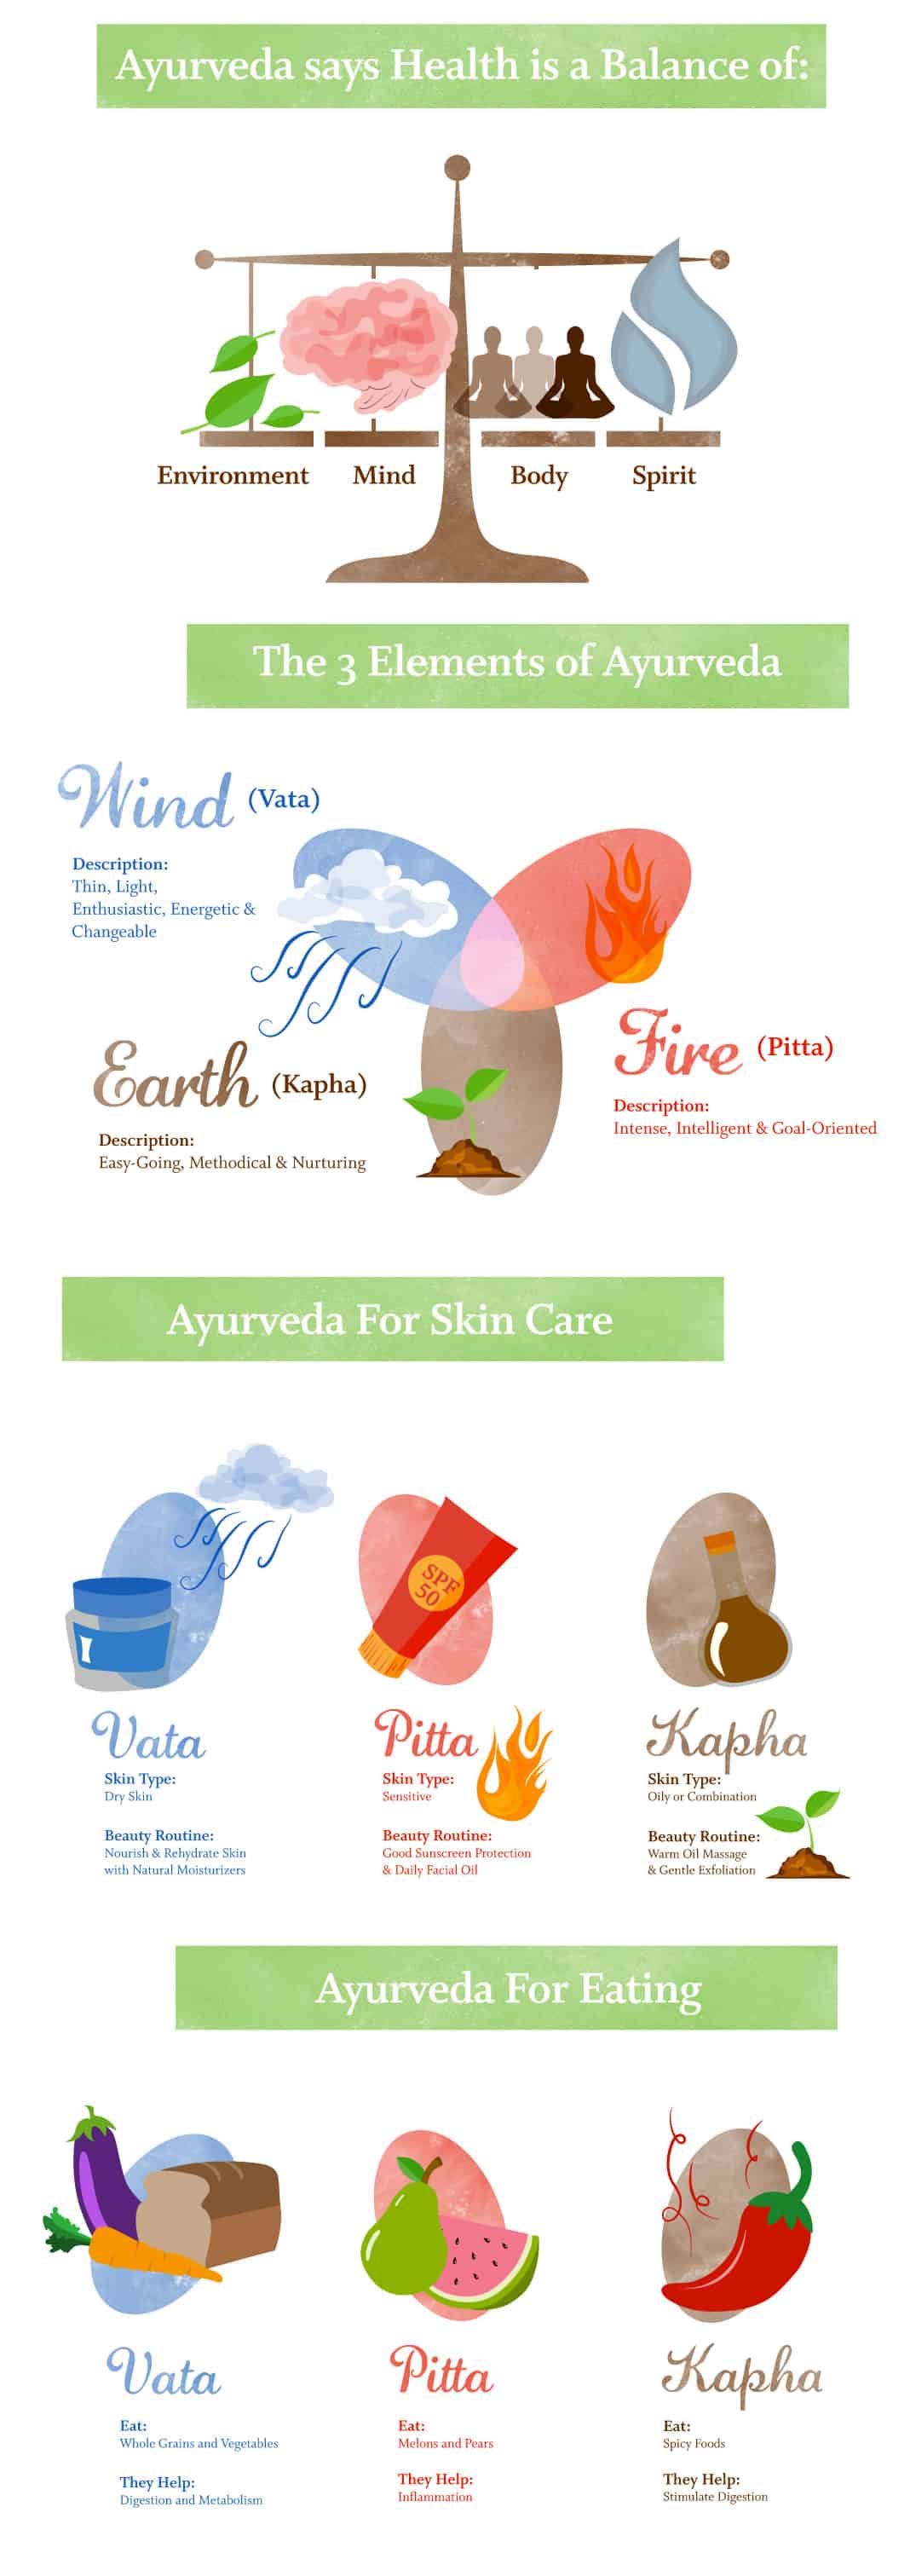 All About Ayurveda - The Ayurvedic Beauty Routine